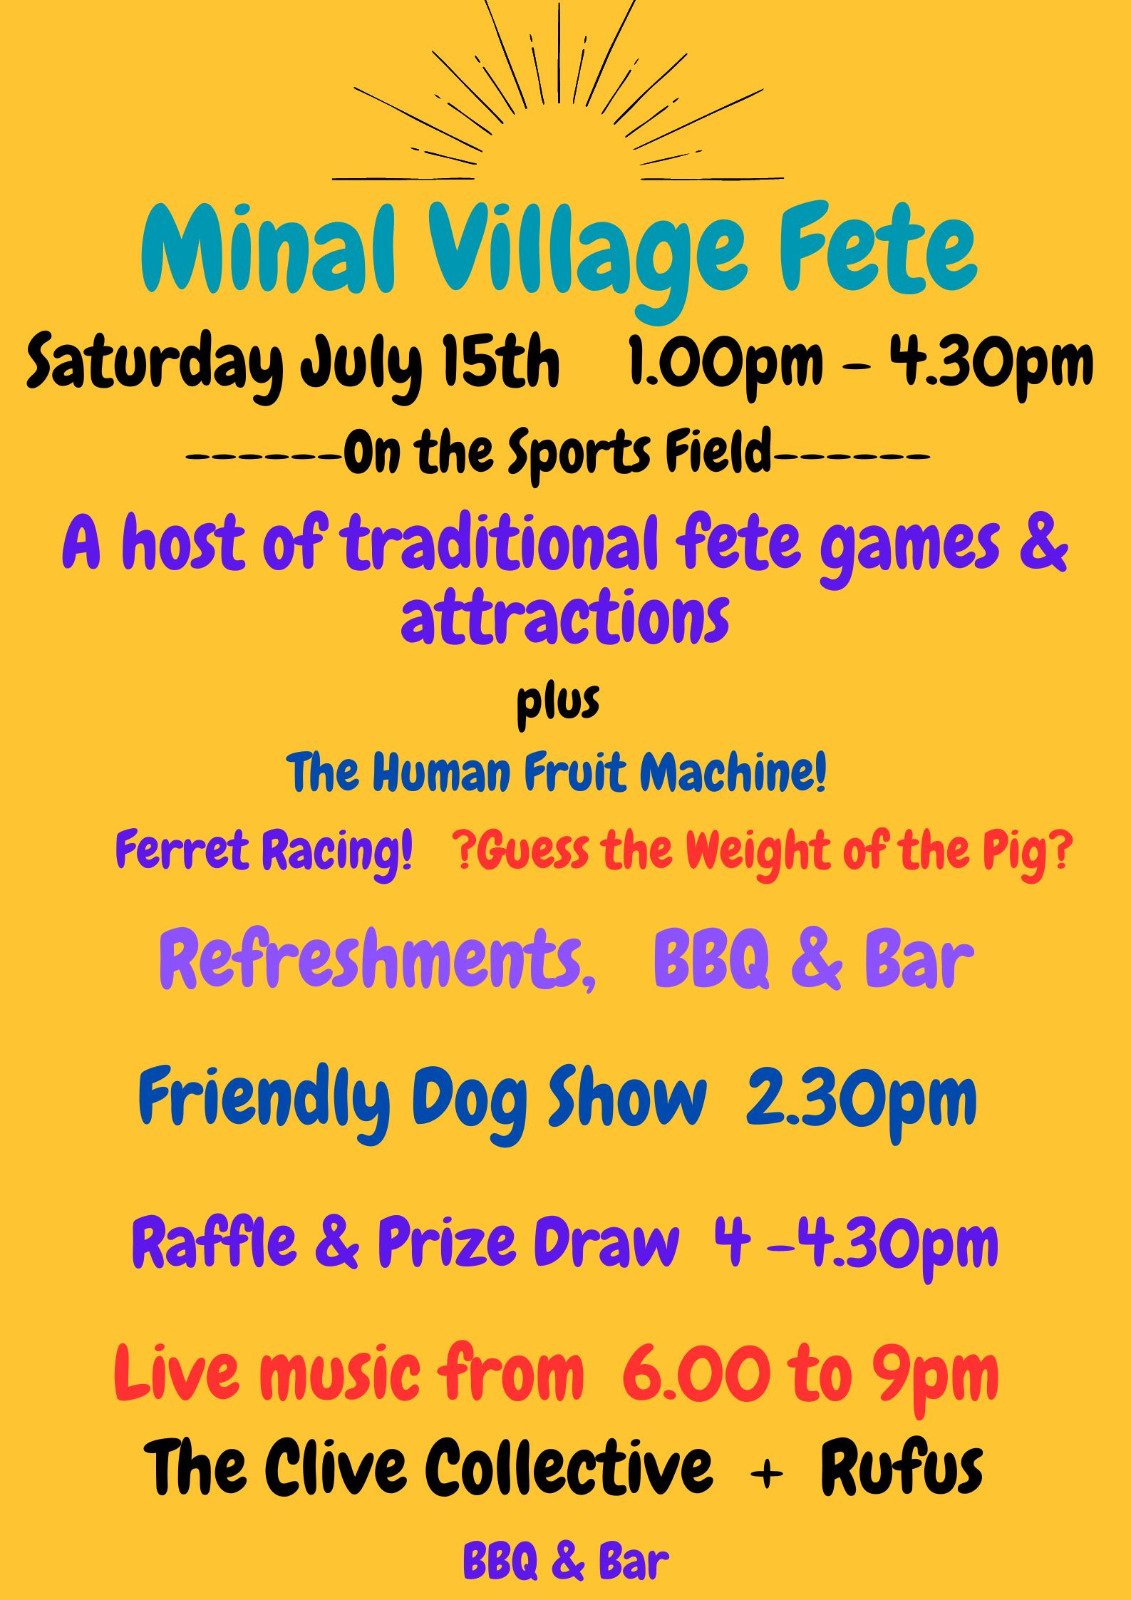 Minal Village Show Saturday 15 July 1.00pm onwards.  Live music from 6.00 – 9.00pm